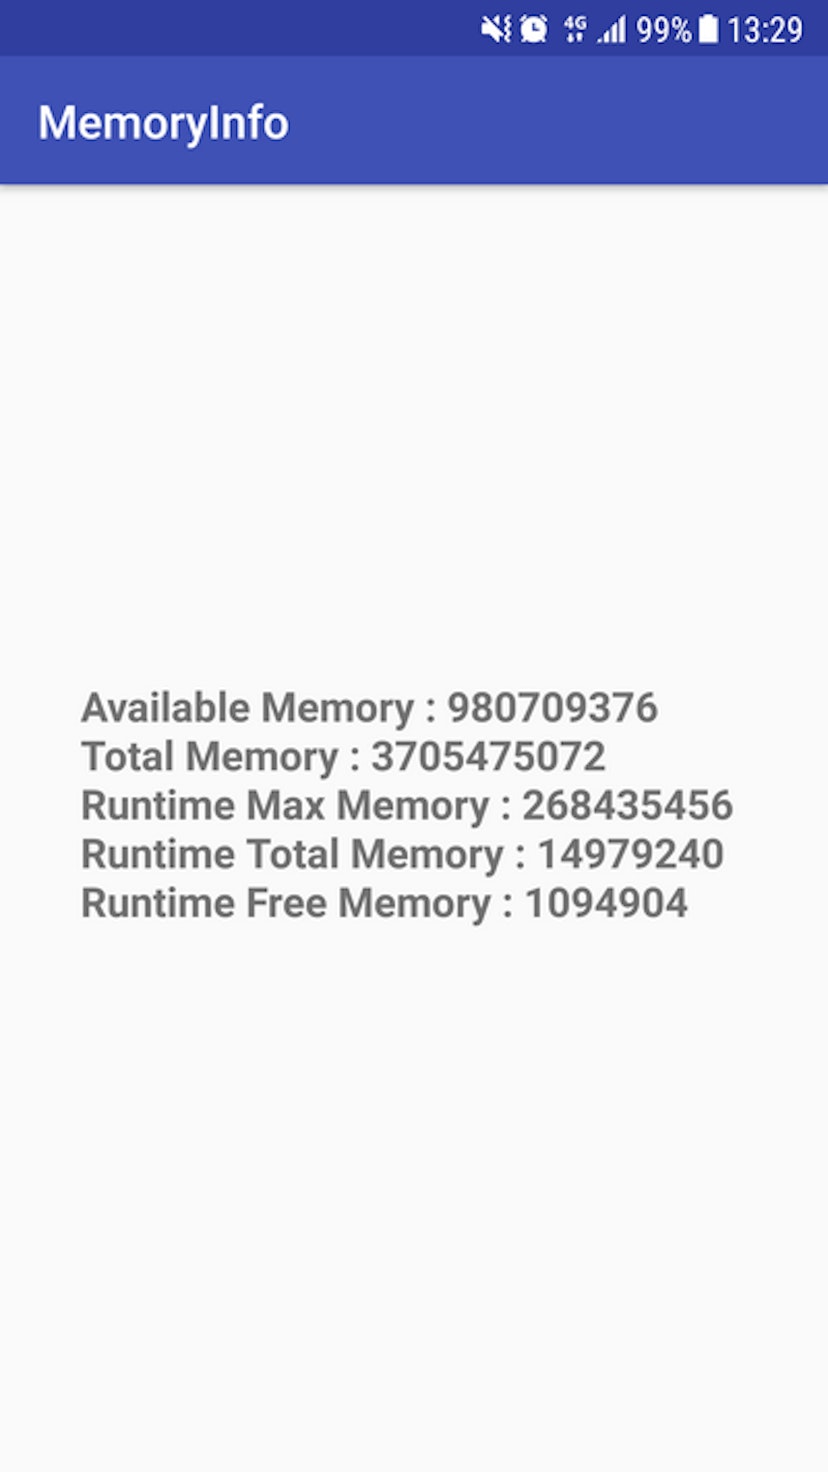 featured image - Learn to get Memory Info at runtime on Android